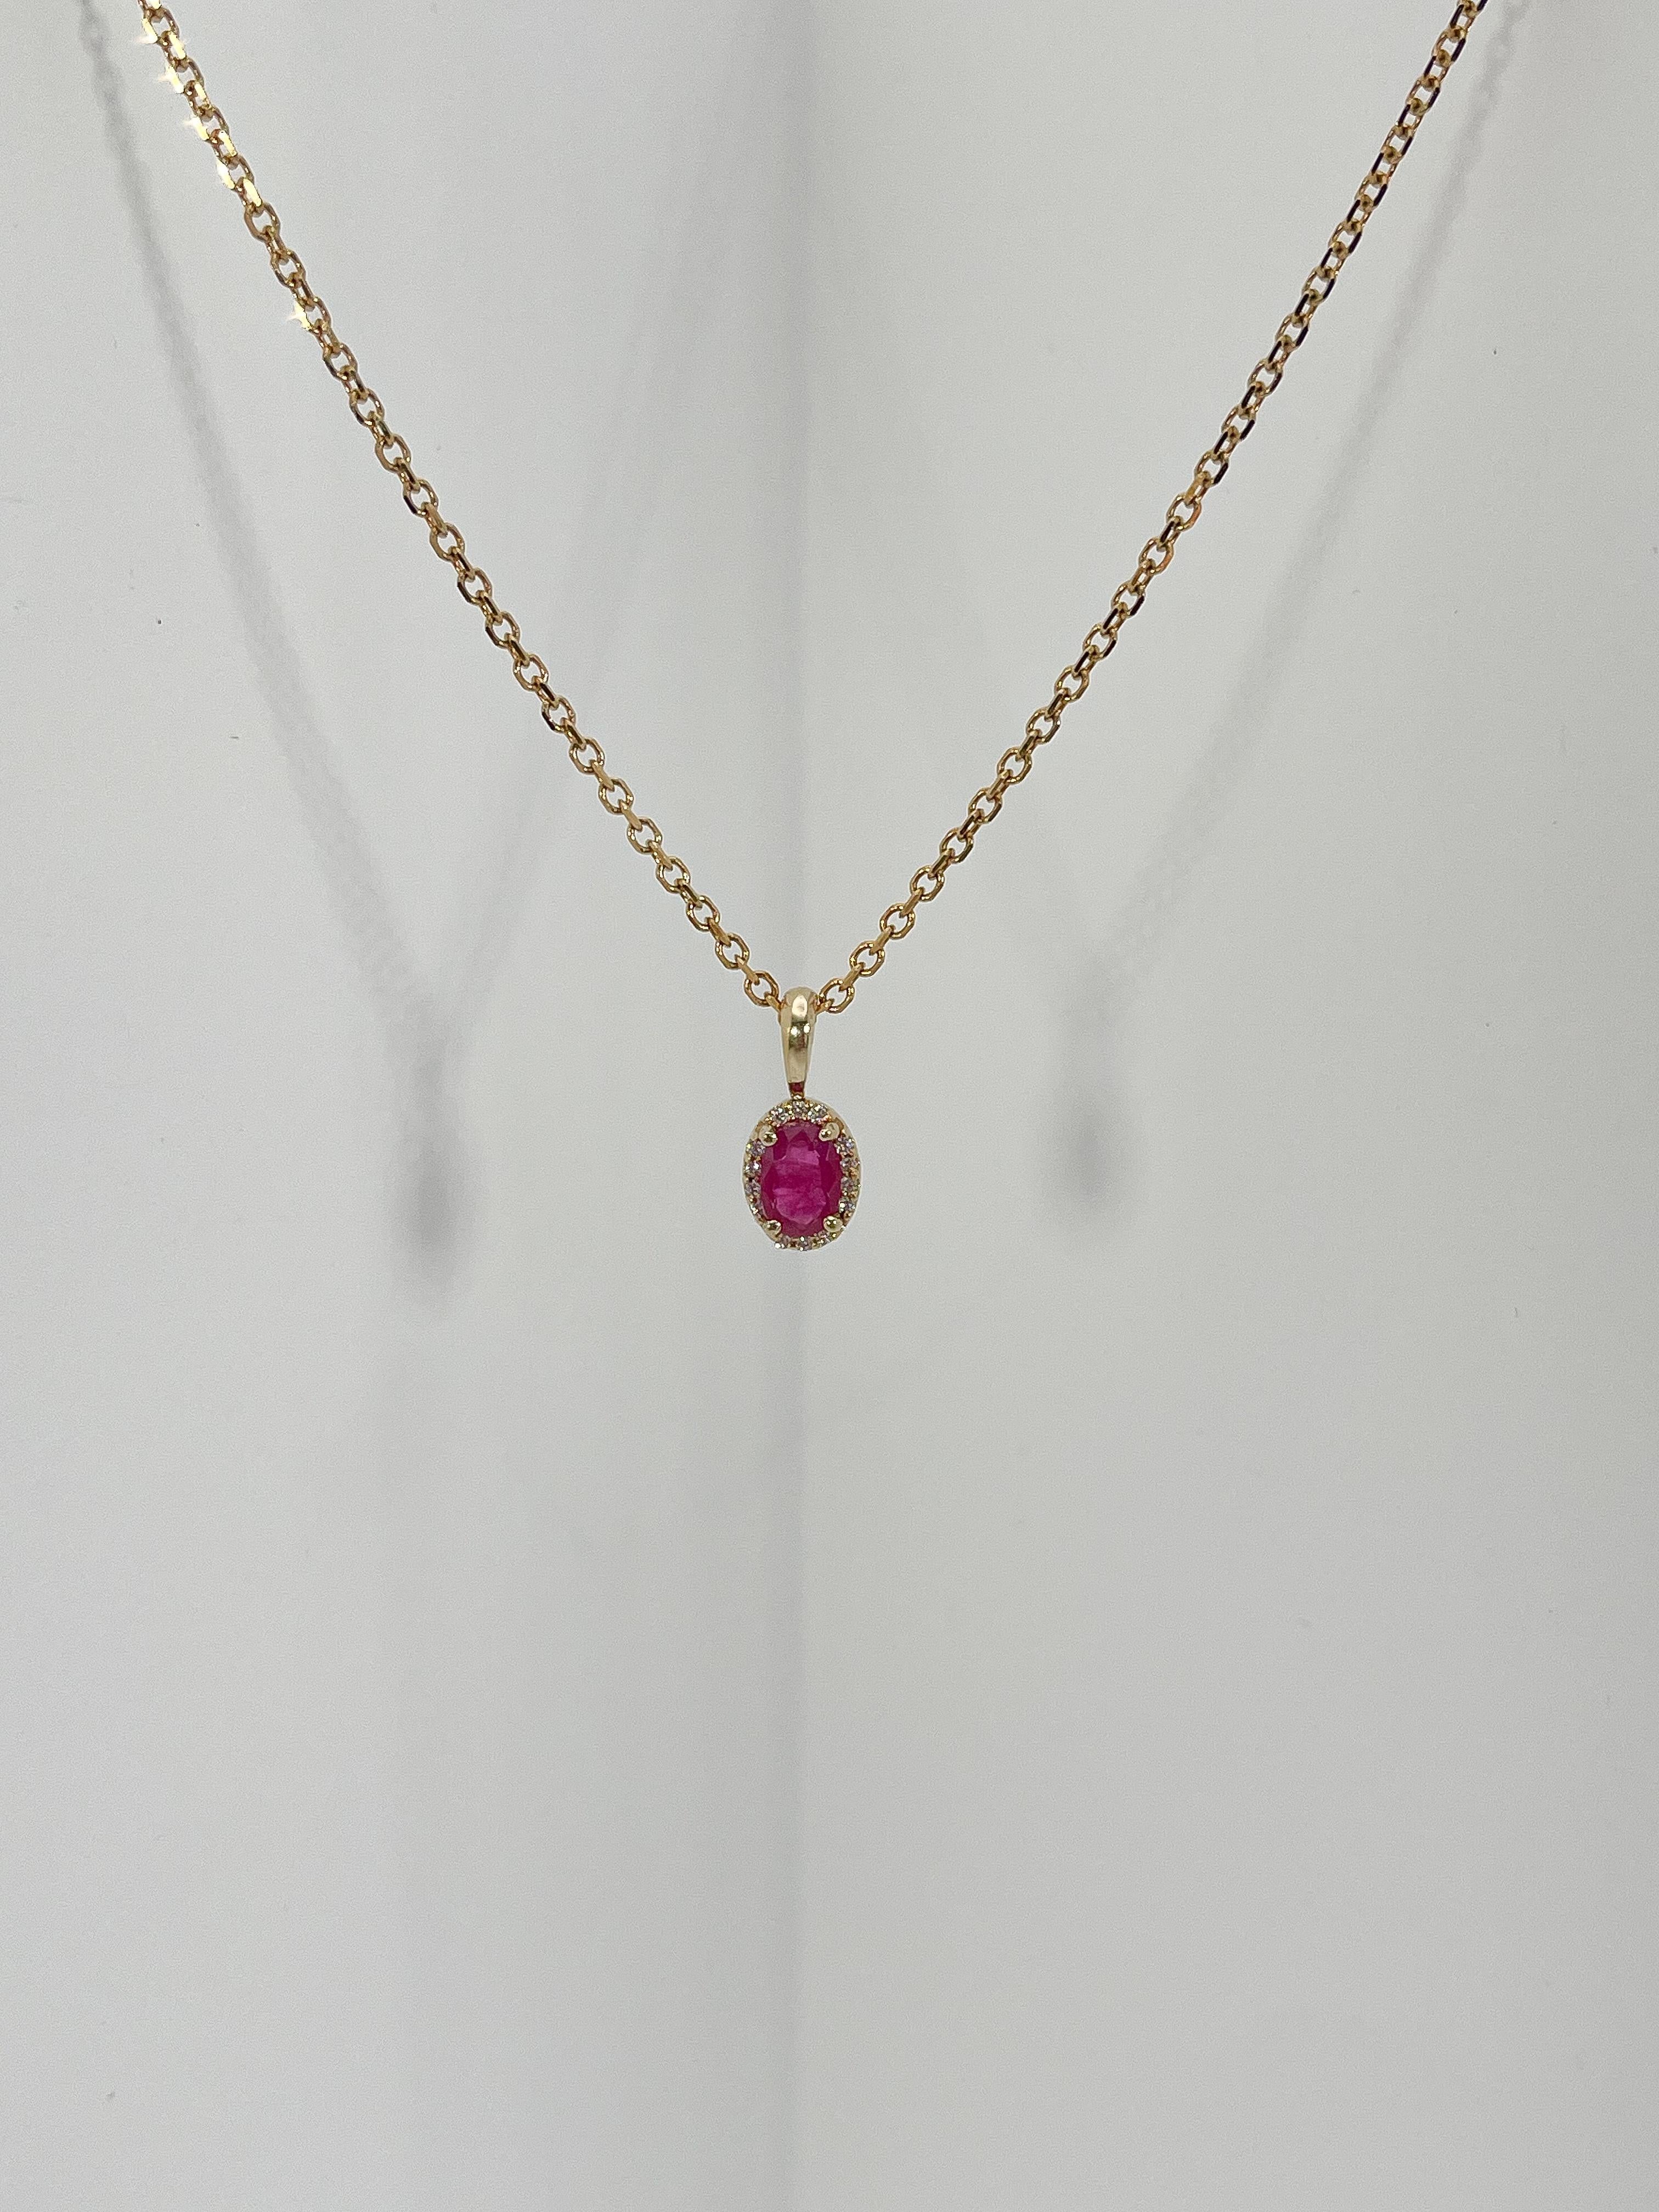 14k yellow gold .50 CTW ruby and diamond halo pendant necklace. The diamonds are all round and the ruby is oval, pendant comes on a 16 inch diamond cut cable chain, has a lobster claw to open and close, and has a total weight of 3.4 grams.